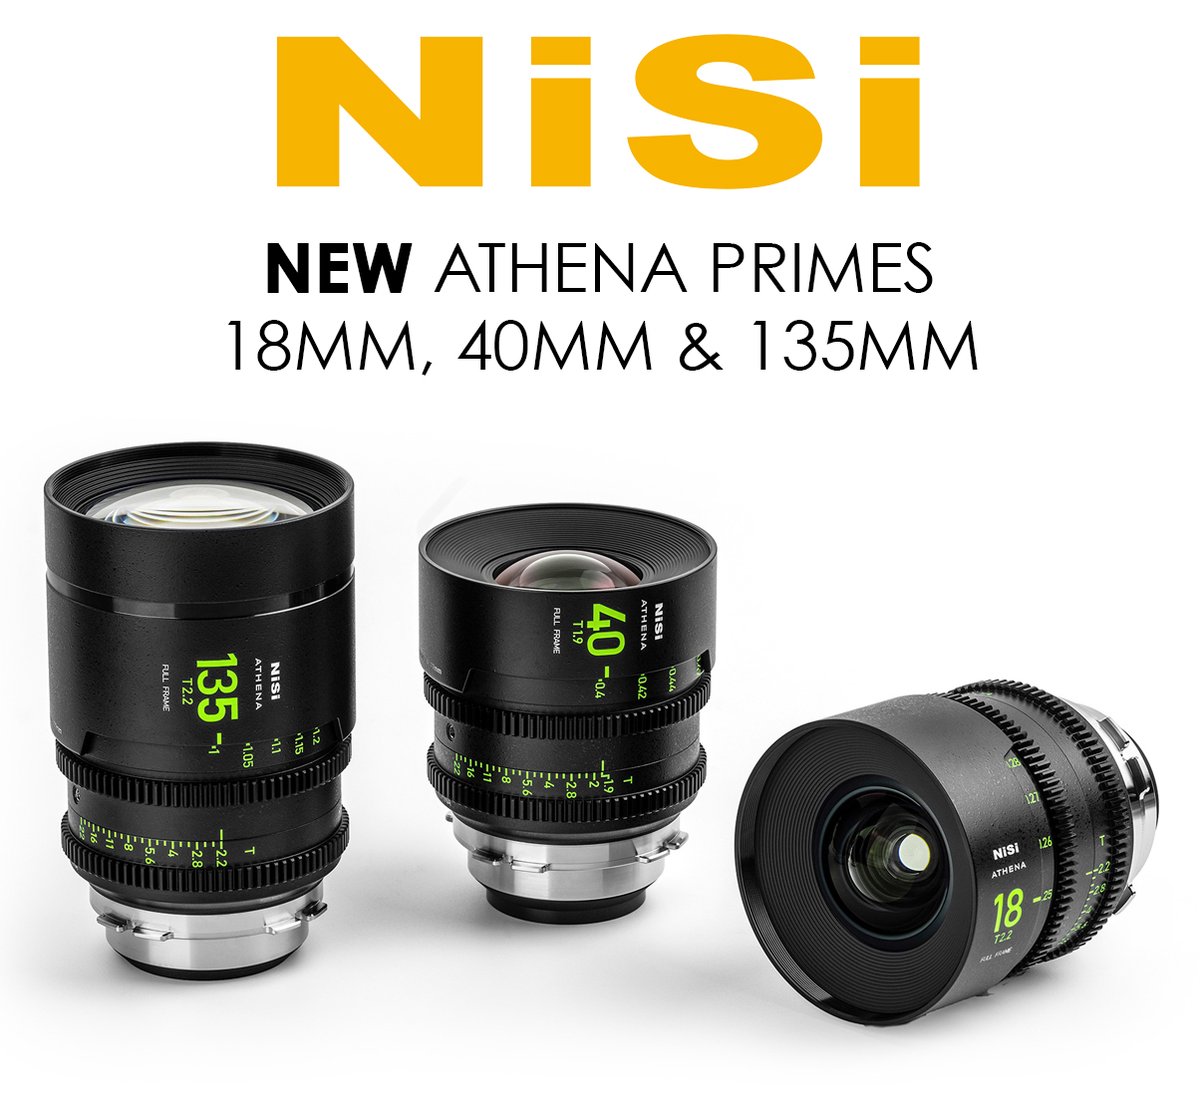 💥 NEW LAUNCH💥 NiSi Athena Prime 18mm, 40mm and 135mm! 📸 The stunning background separation and captivating bokeh, alongside perfectly aligned characteristics, micro contrast, and colour ensure a seamless experience across the lineup. View the range: bit.ly/3Uq8tzn